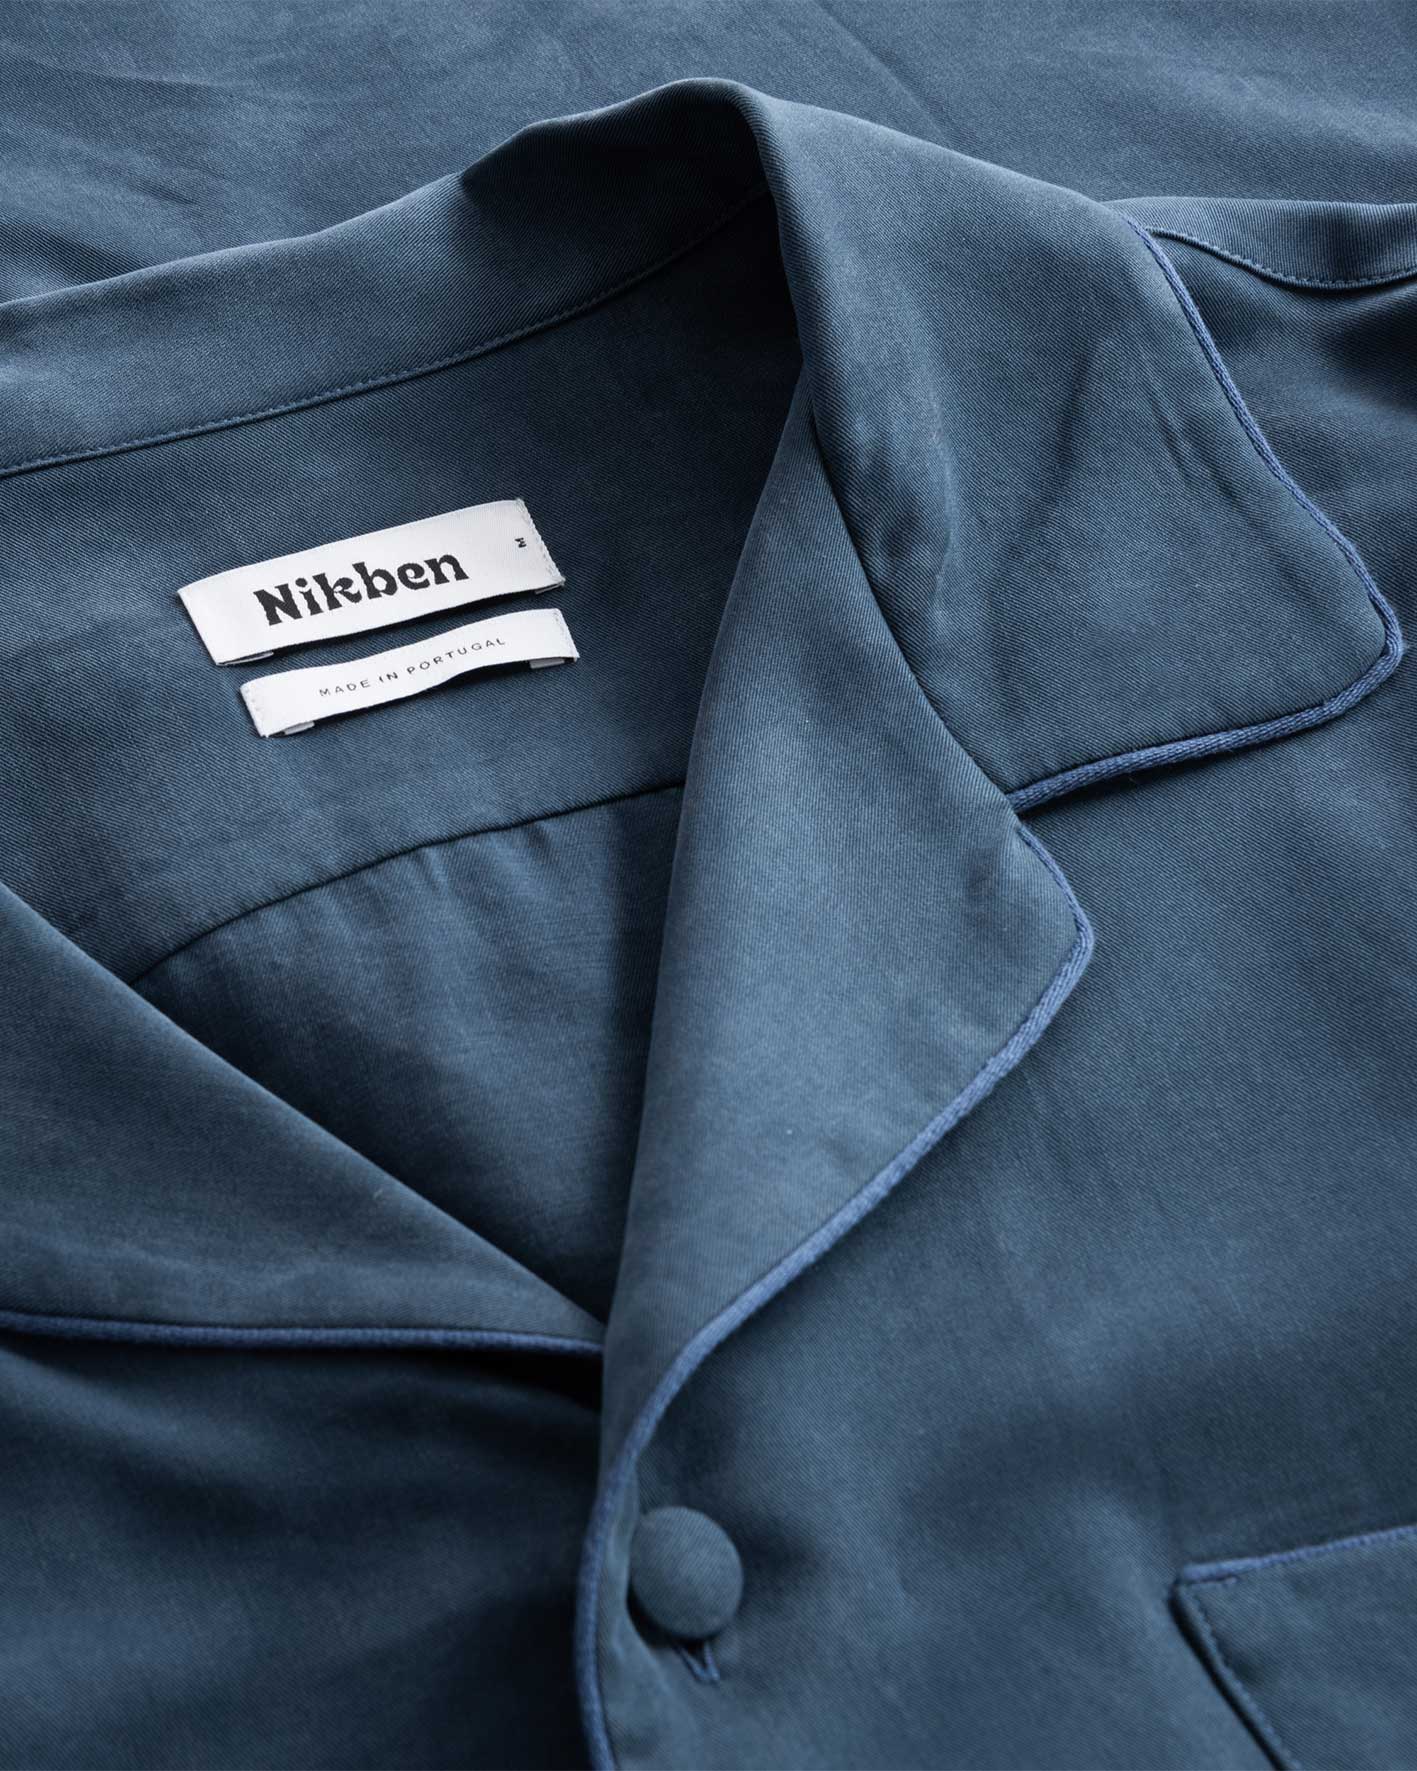 Collar, button and neck label on blue shirt